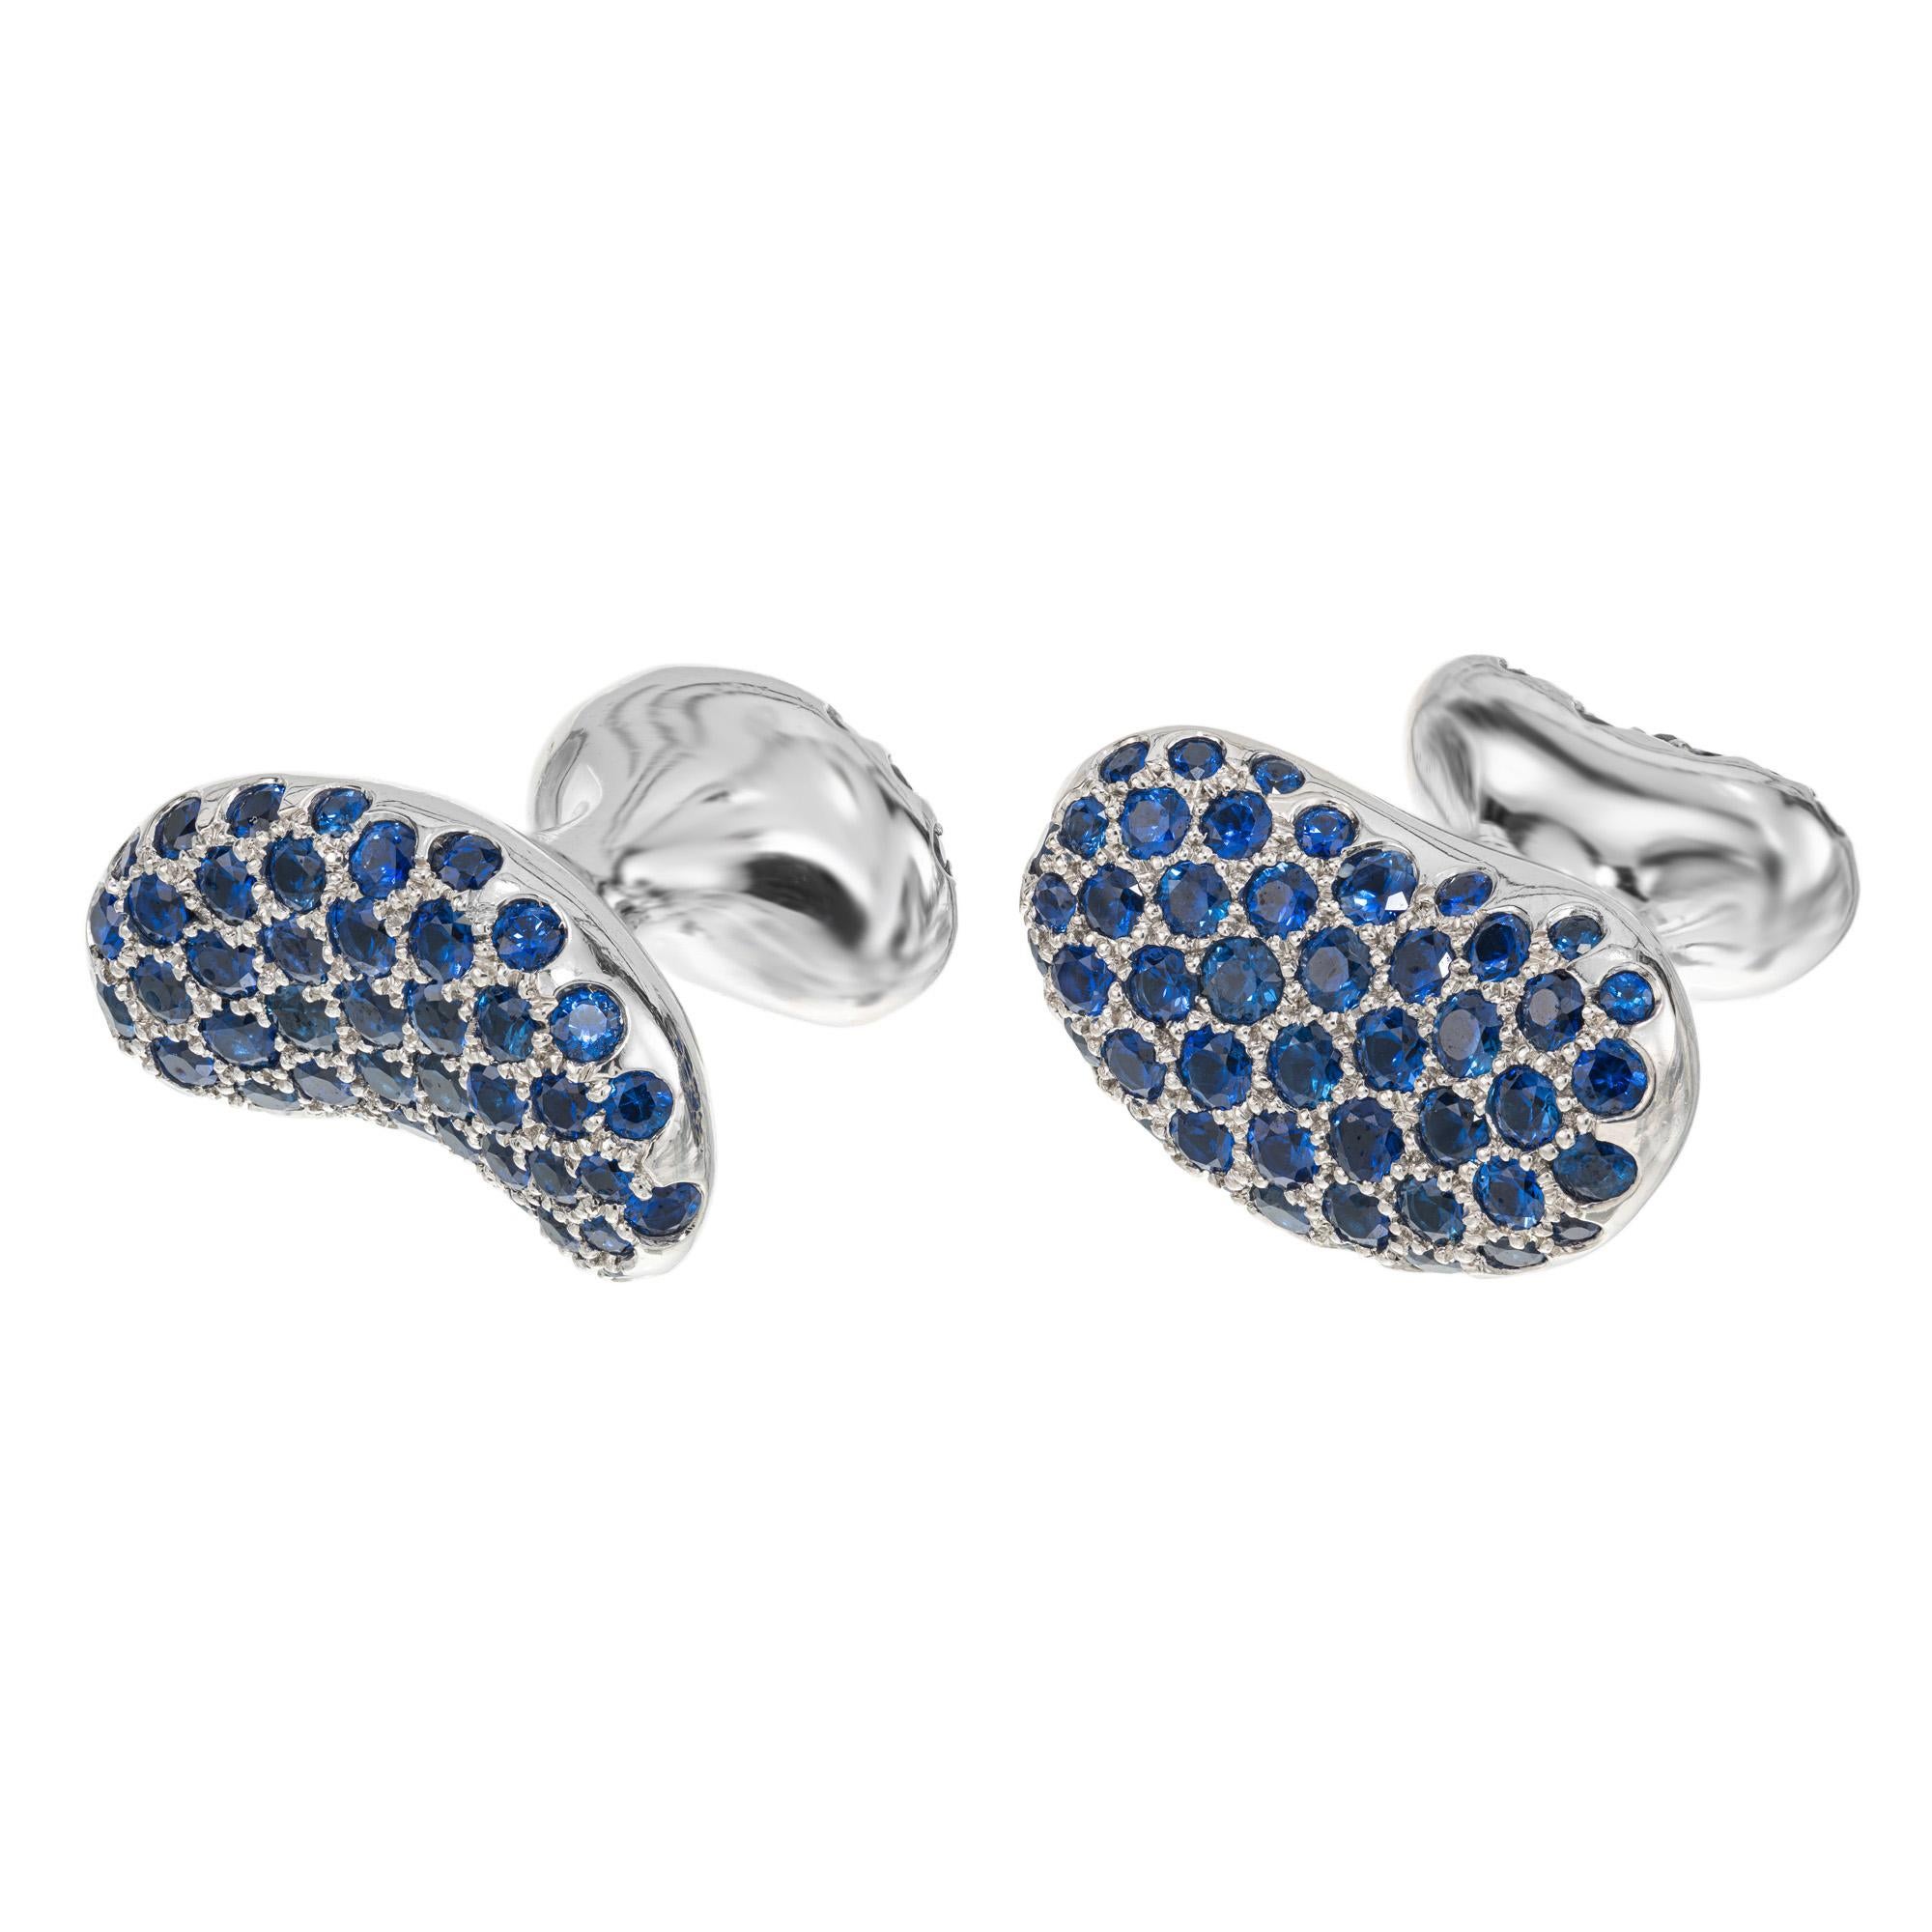 Extraordinary Tiffany & Co Elsa Peretti sapphire bean men's cufflinks. Crafted out of solid platinum, these classic Peretti bean style cufflinks are adorned with a total of 166 round blue sapphires on both sides brining the total carat weight to